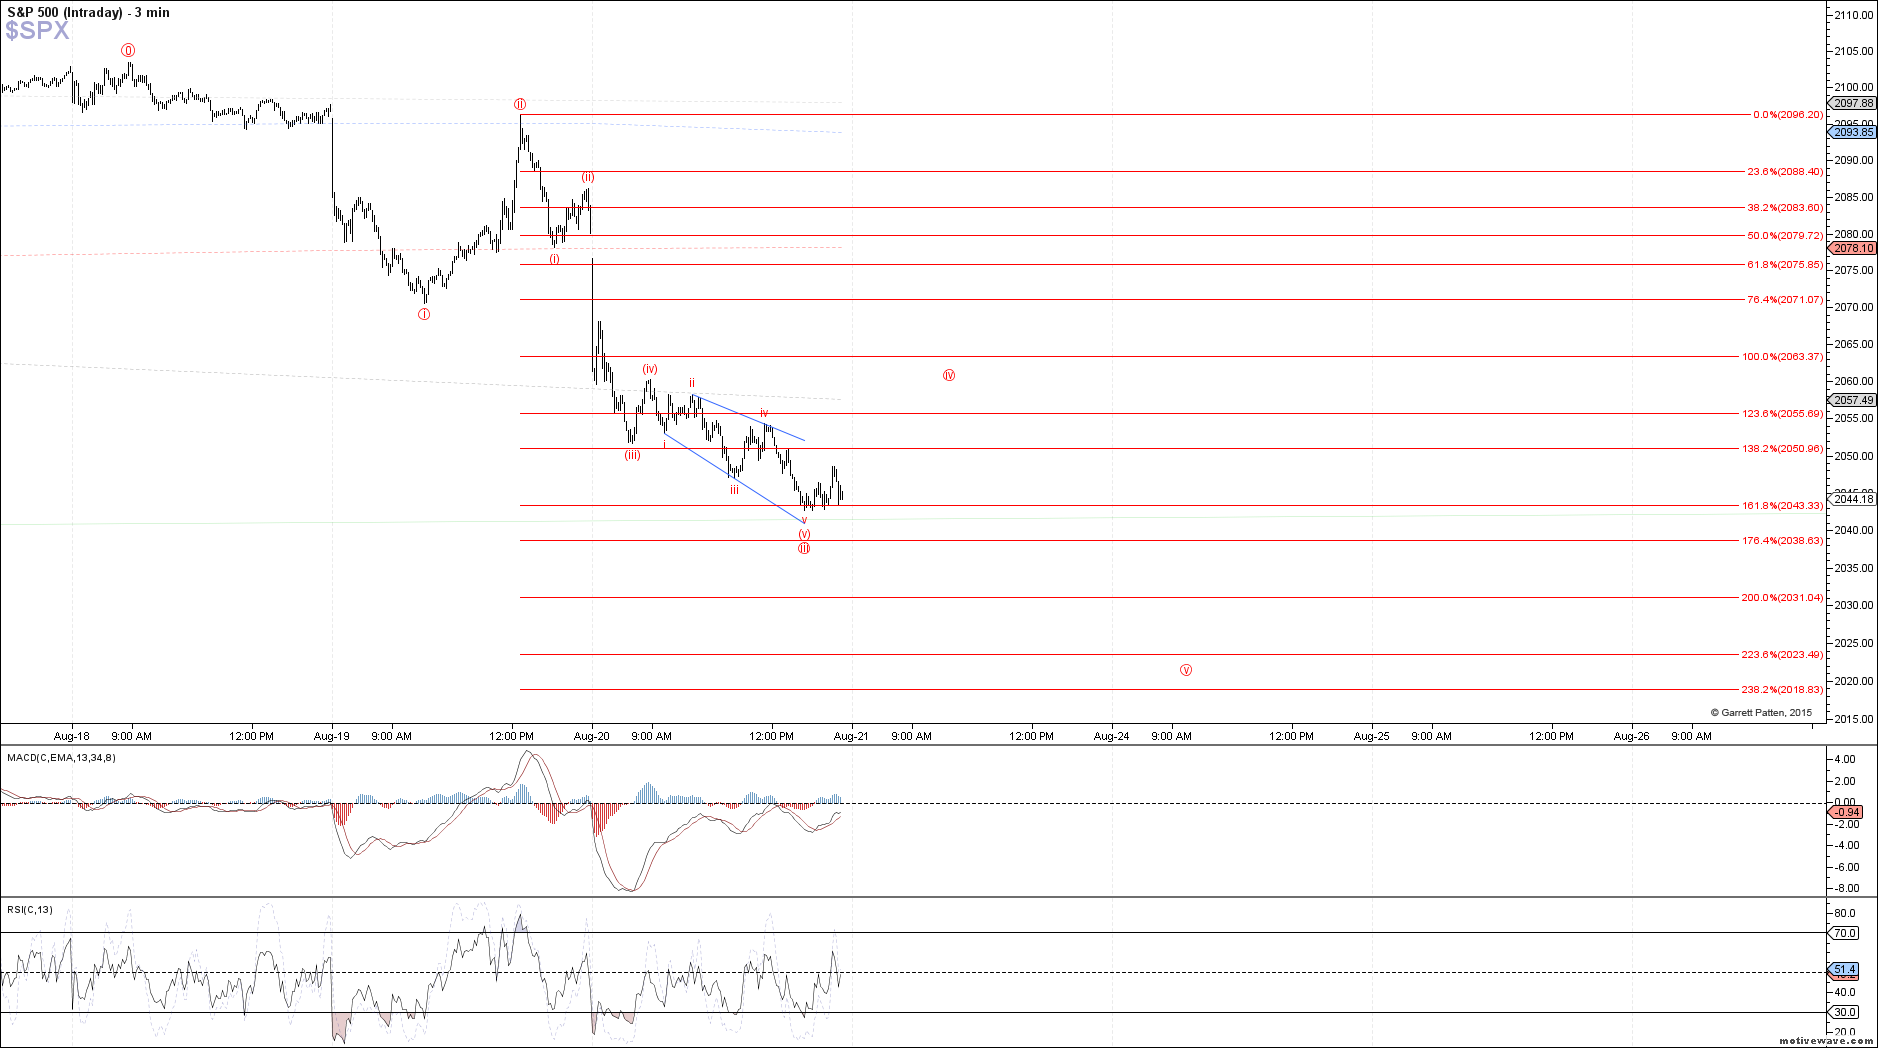 $SPX - Intraday - Aug-20 1345 PM (3 min)